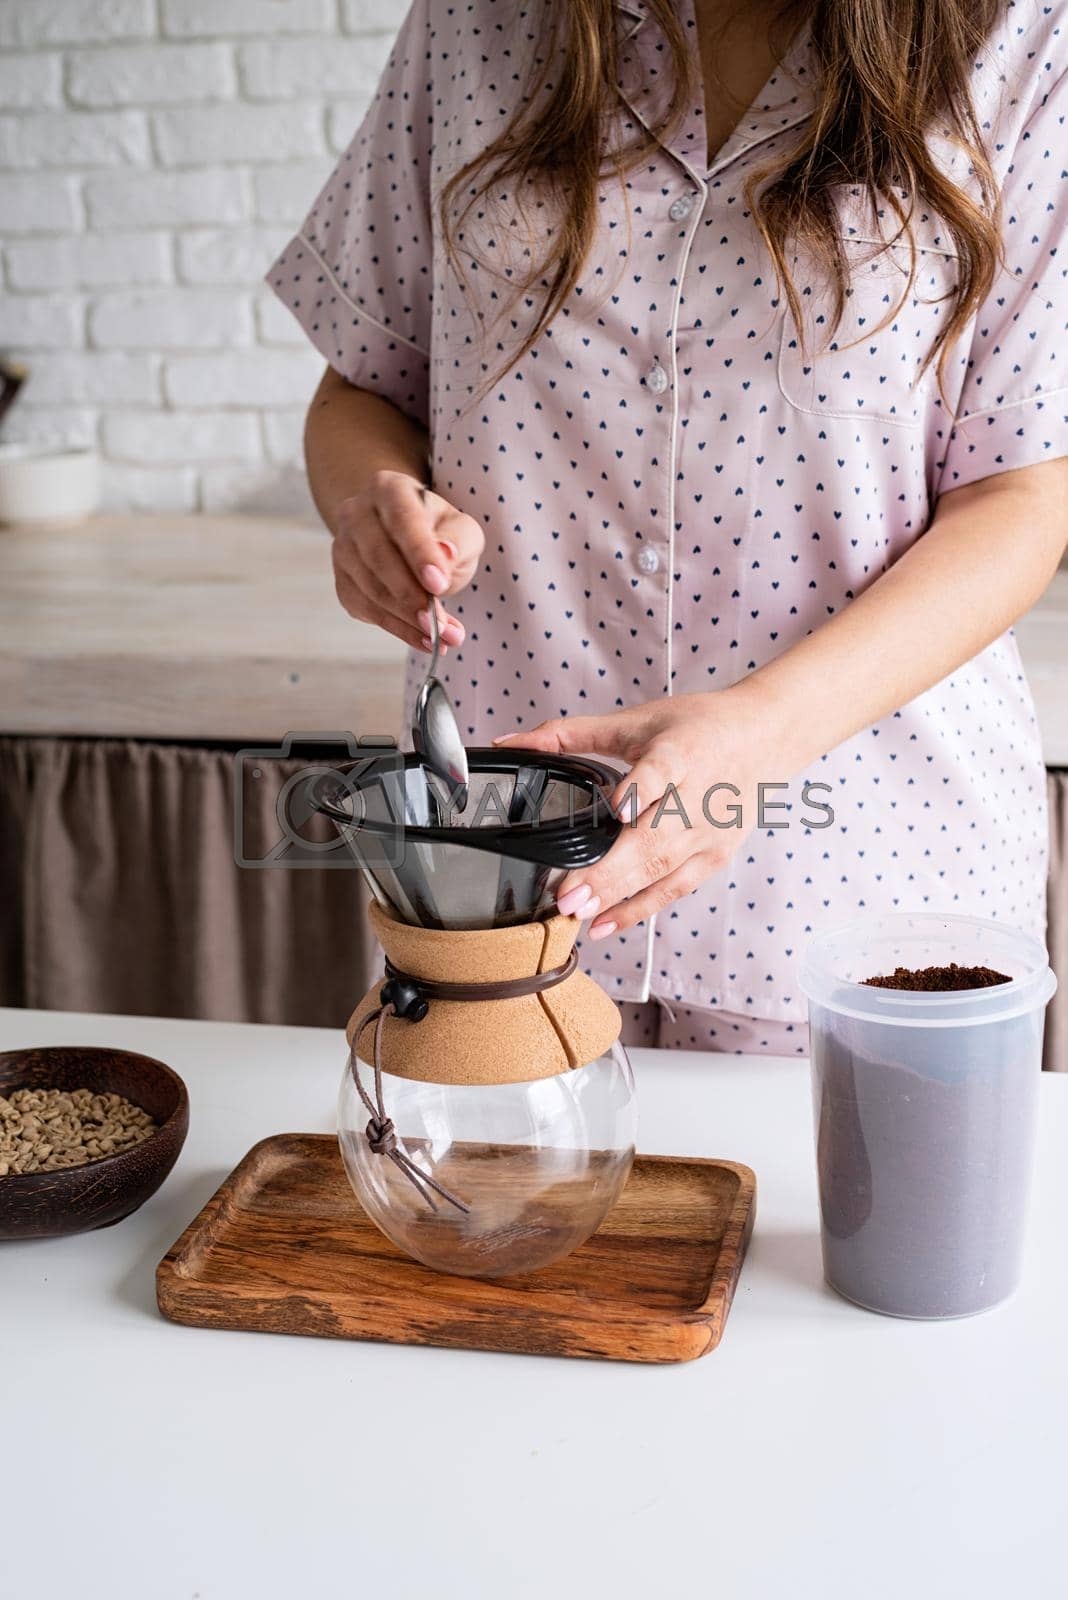 Royalty free image of young woman in lovely pajamas making coffee at home kitchen by Desperada